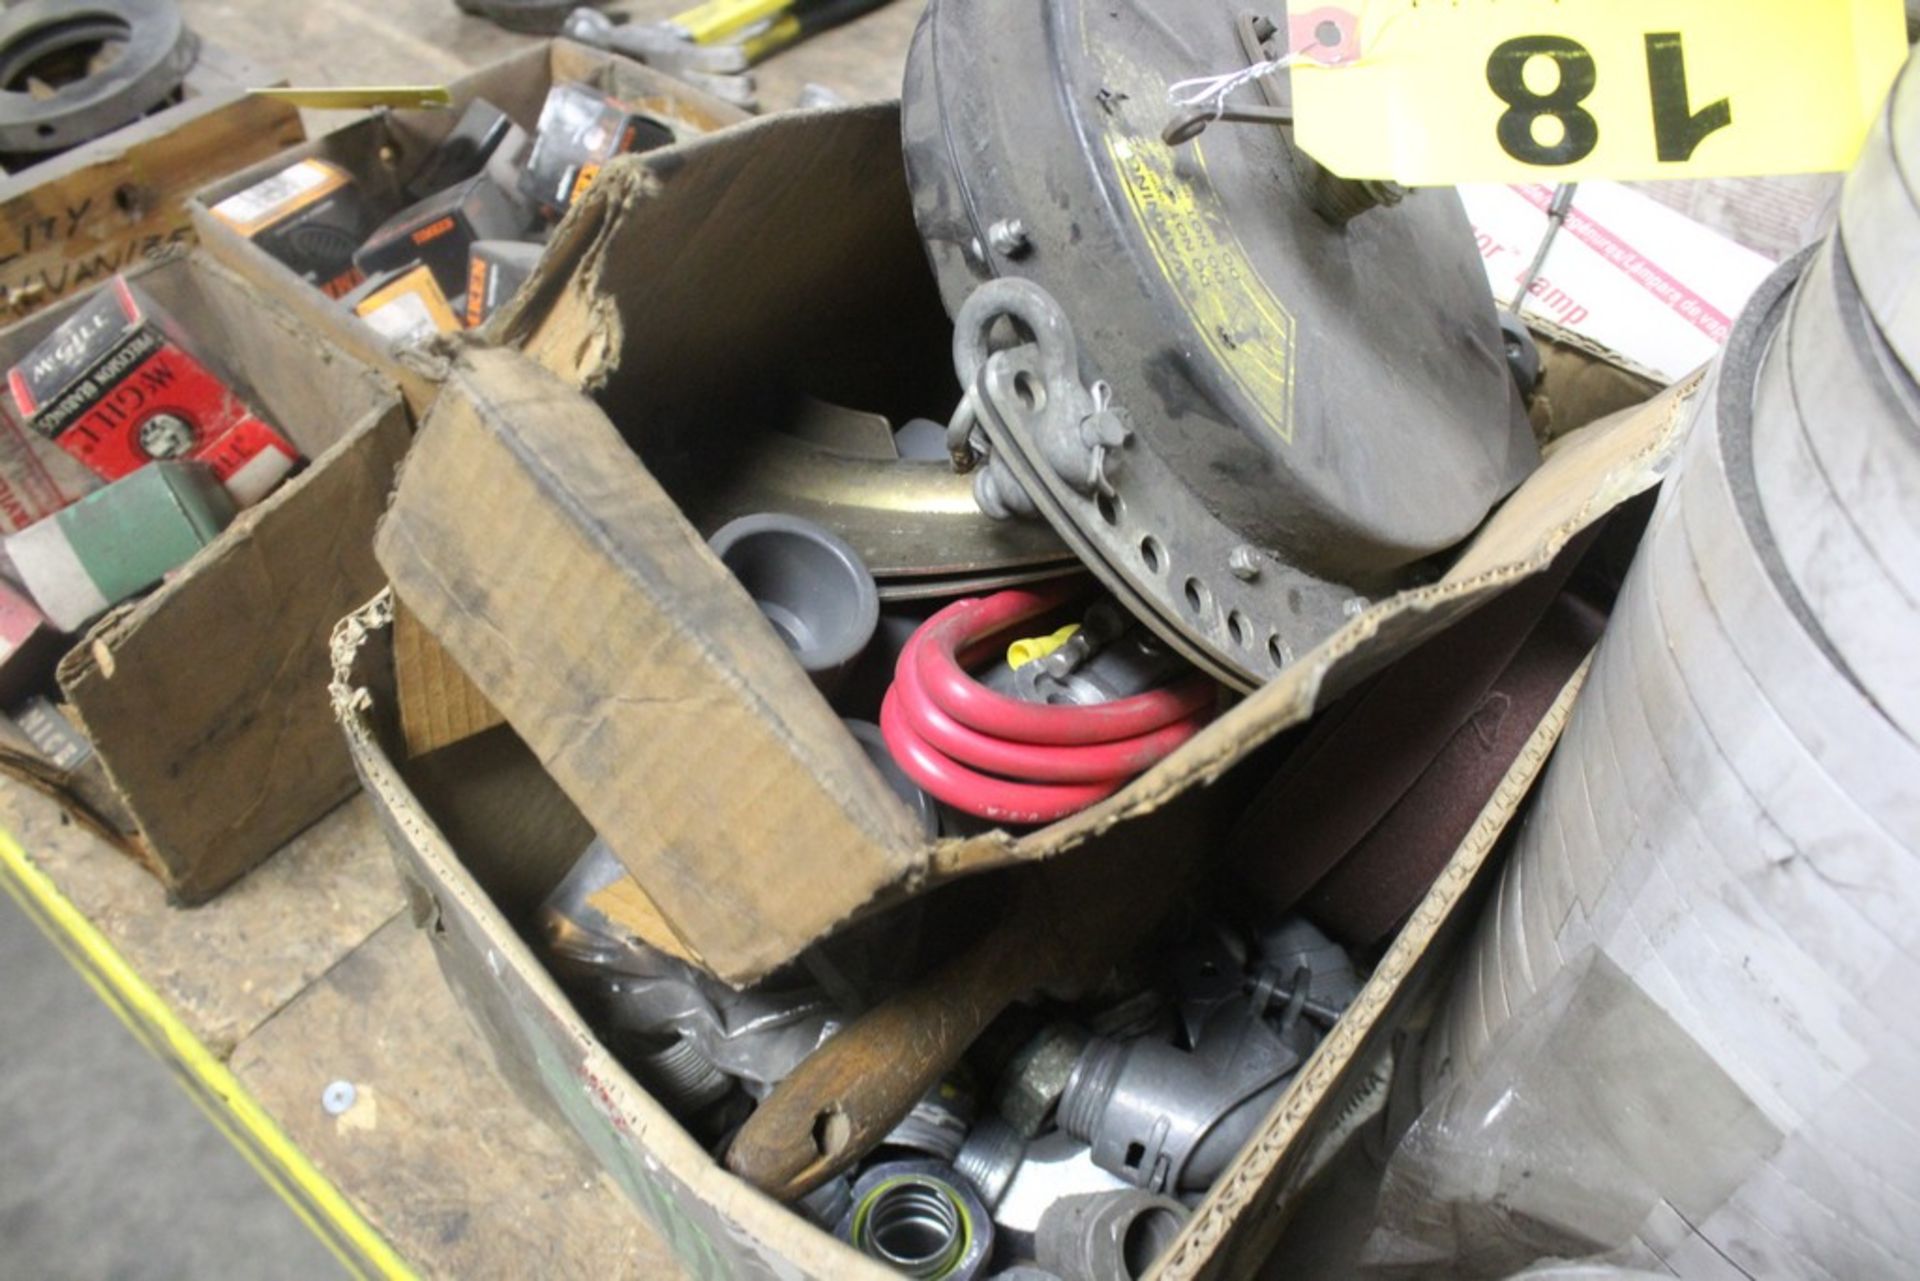 Lot: Miscellaneous: Electrical - Belts - Plumbing - Tape - Image 2 of 3